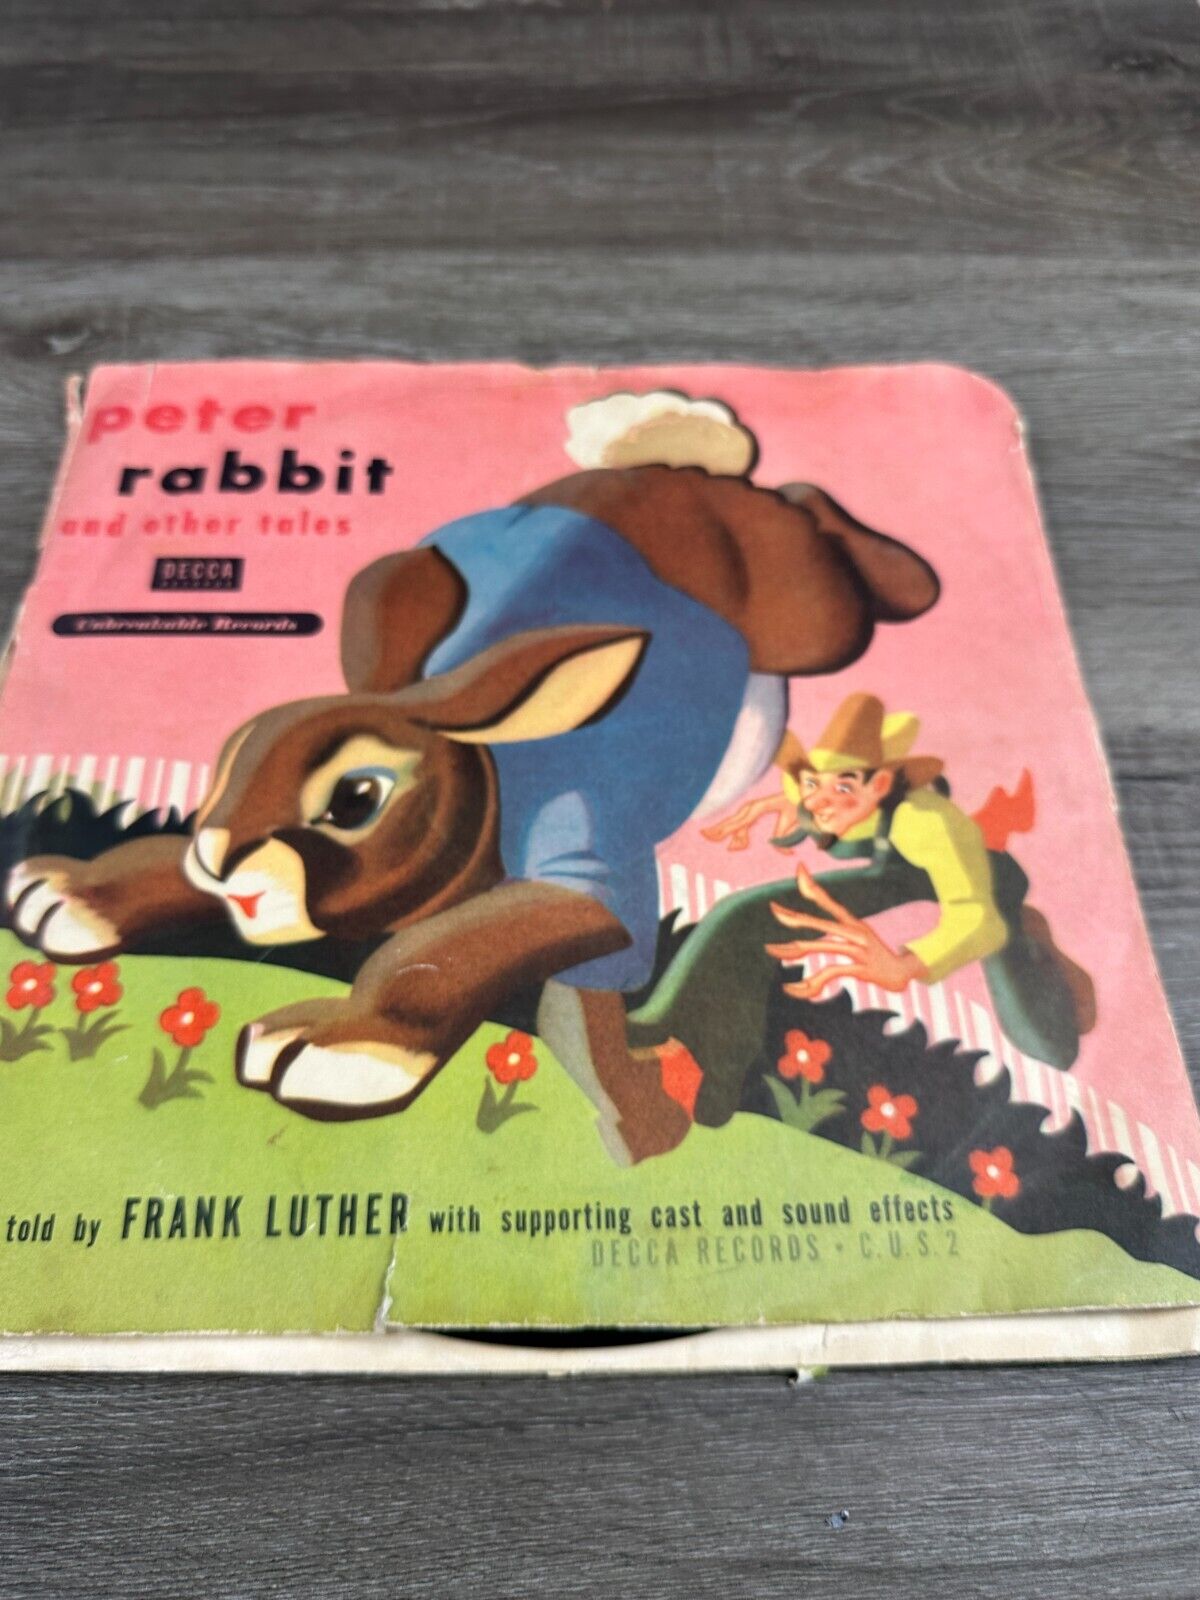 Peter Rabbit & Others Frank Luther  2 Reord Set Decca Records